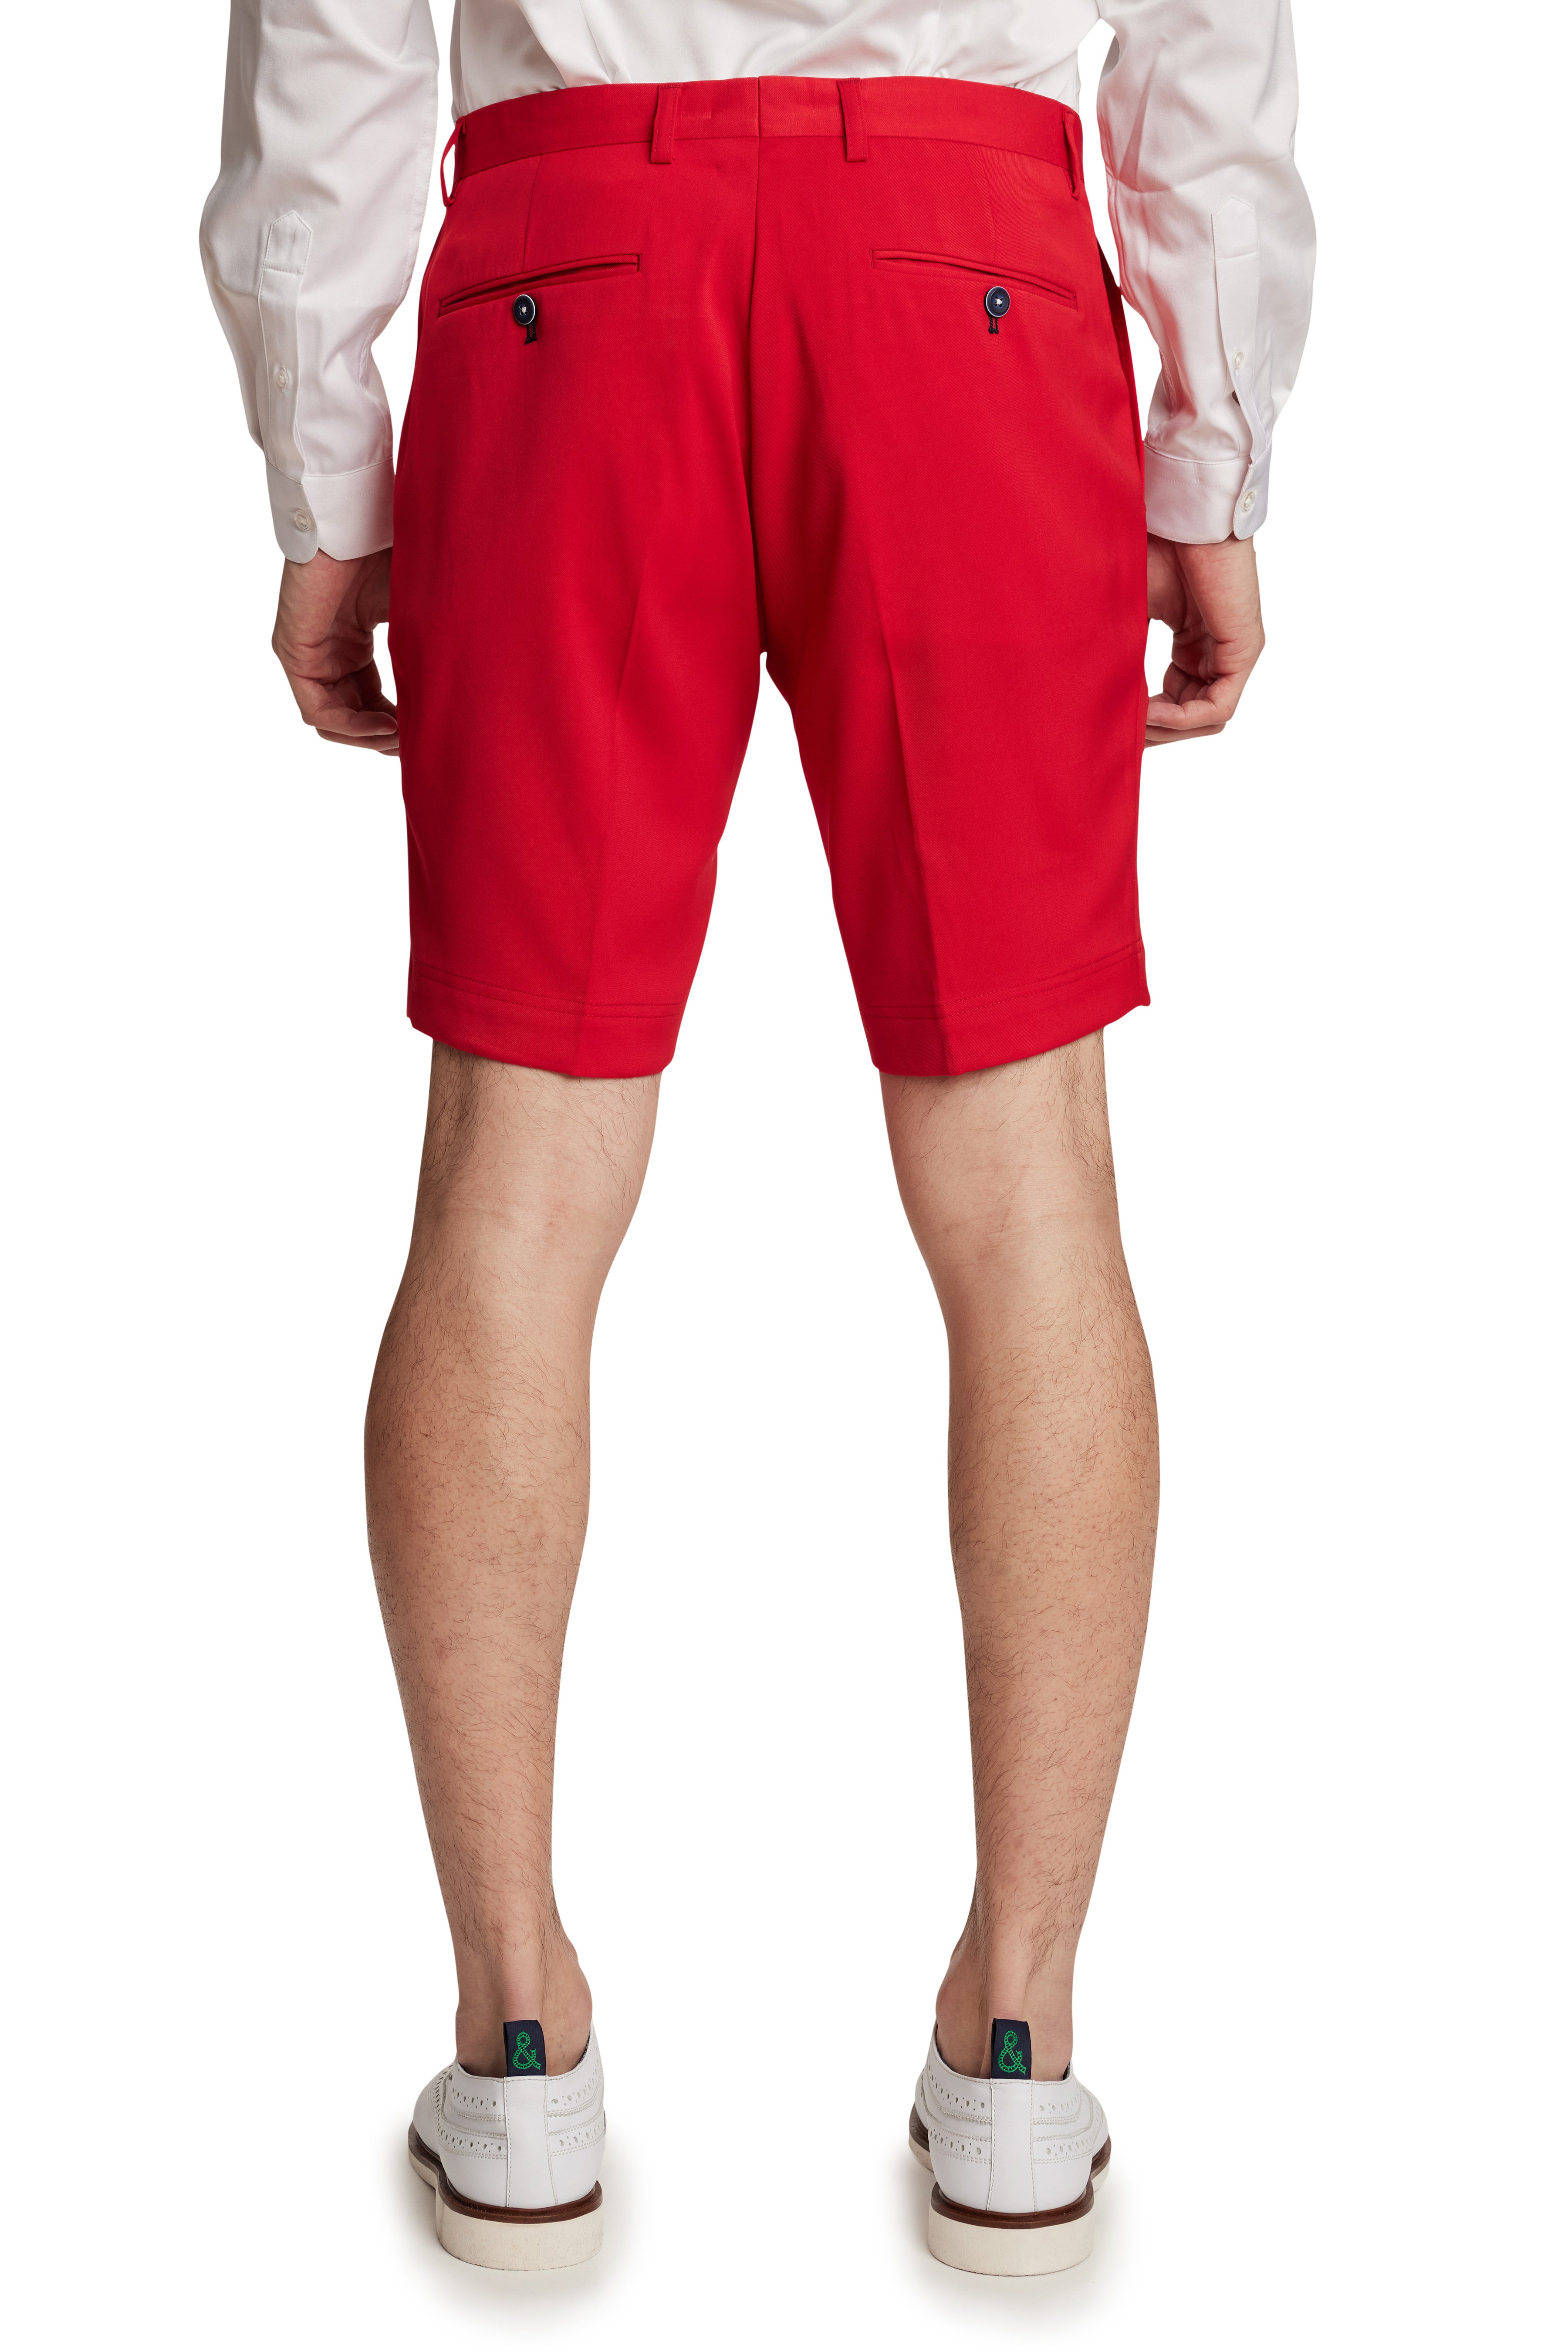 Fairview Shorts - slim - Hot Rod Red